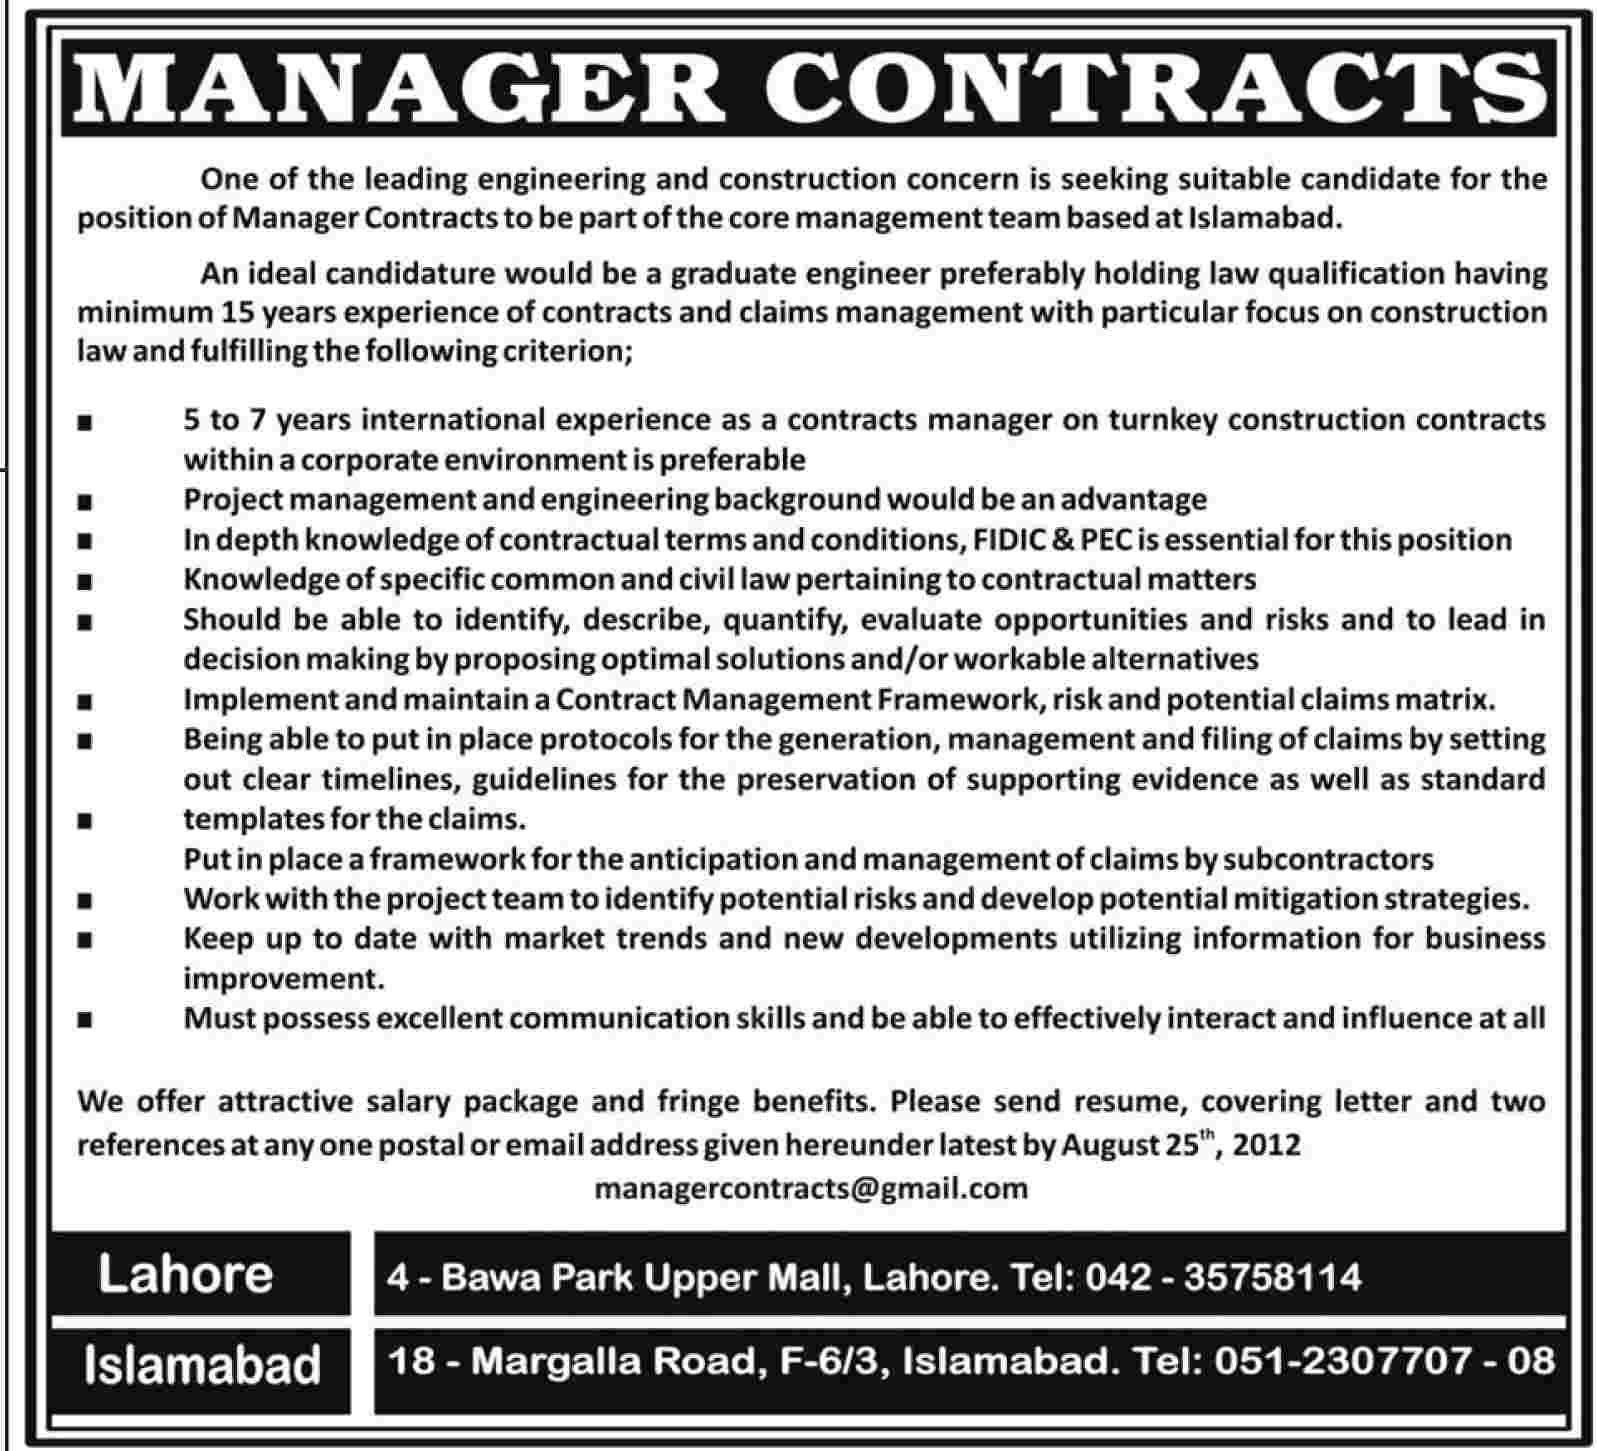 An Engineering and Construction Company Requires Manager Contract